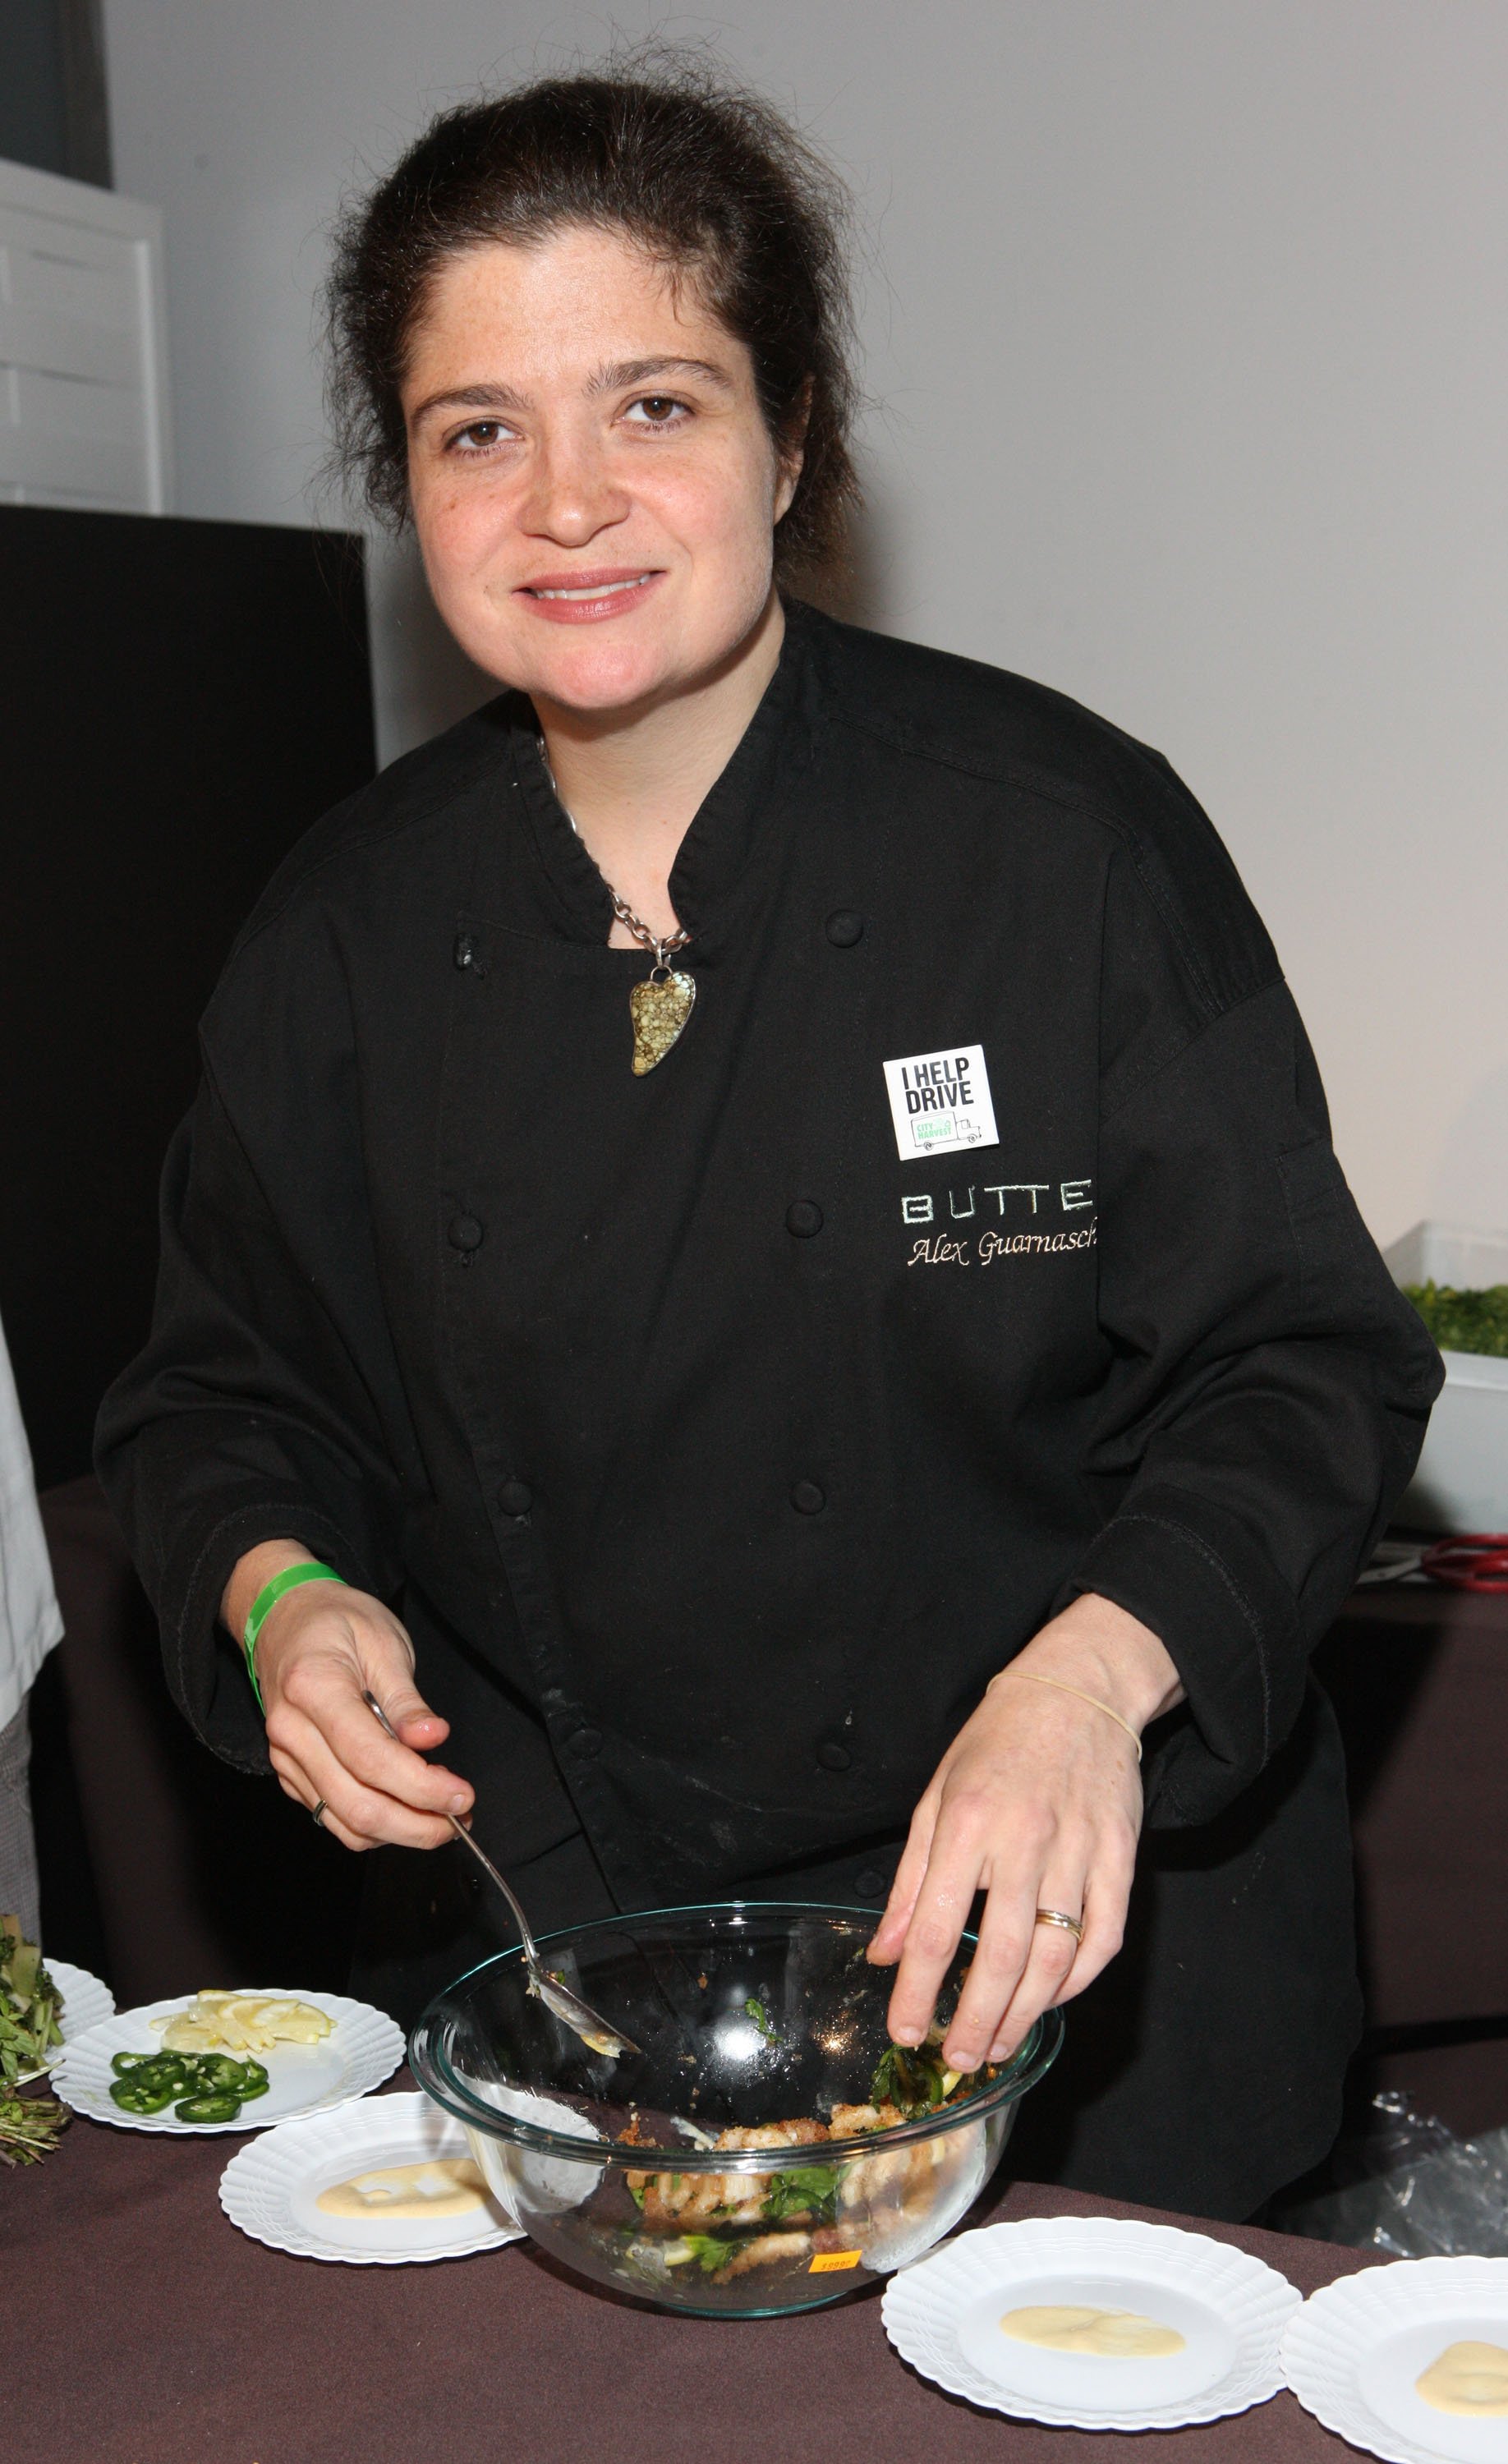 Alex Guarnaschelli during the 11th Annual New York Taste at Skylight on November 2, 2009 in New York City. / Source: Getty Images